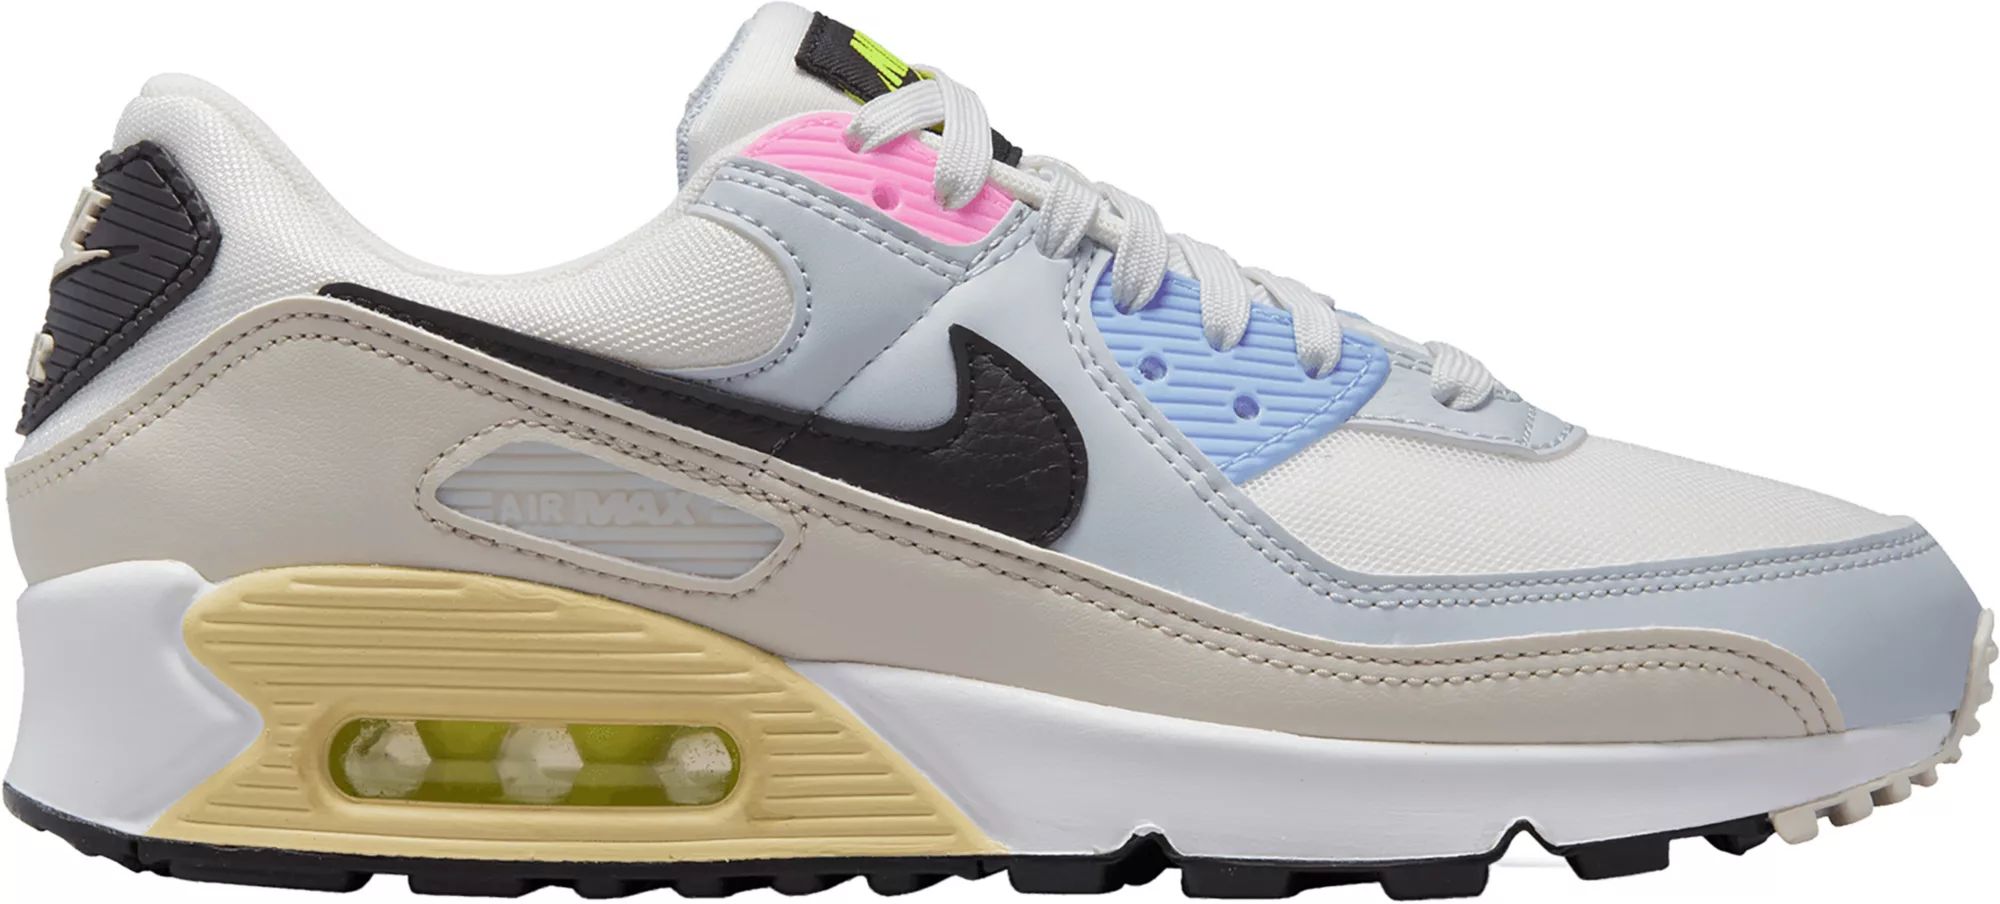 Nike Women's Air Max 90 Shoes, Size 8, Summit White/Lt Bone/Blk | Back to School | Dick's Sporting Goods